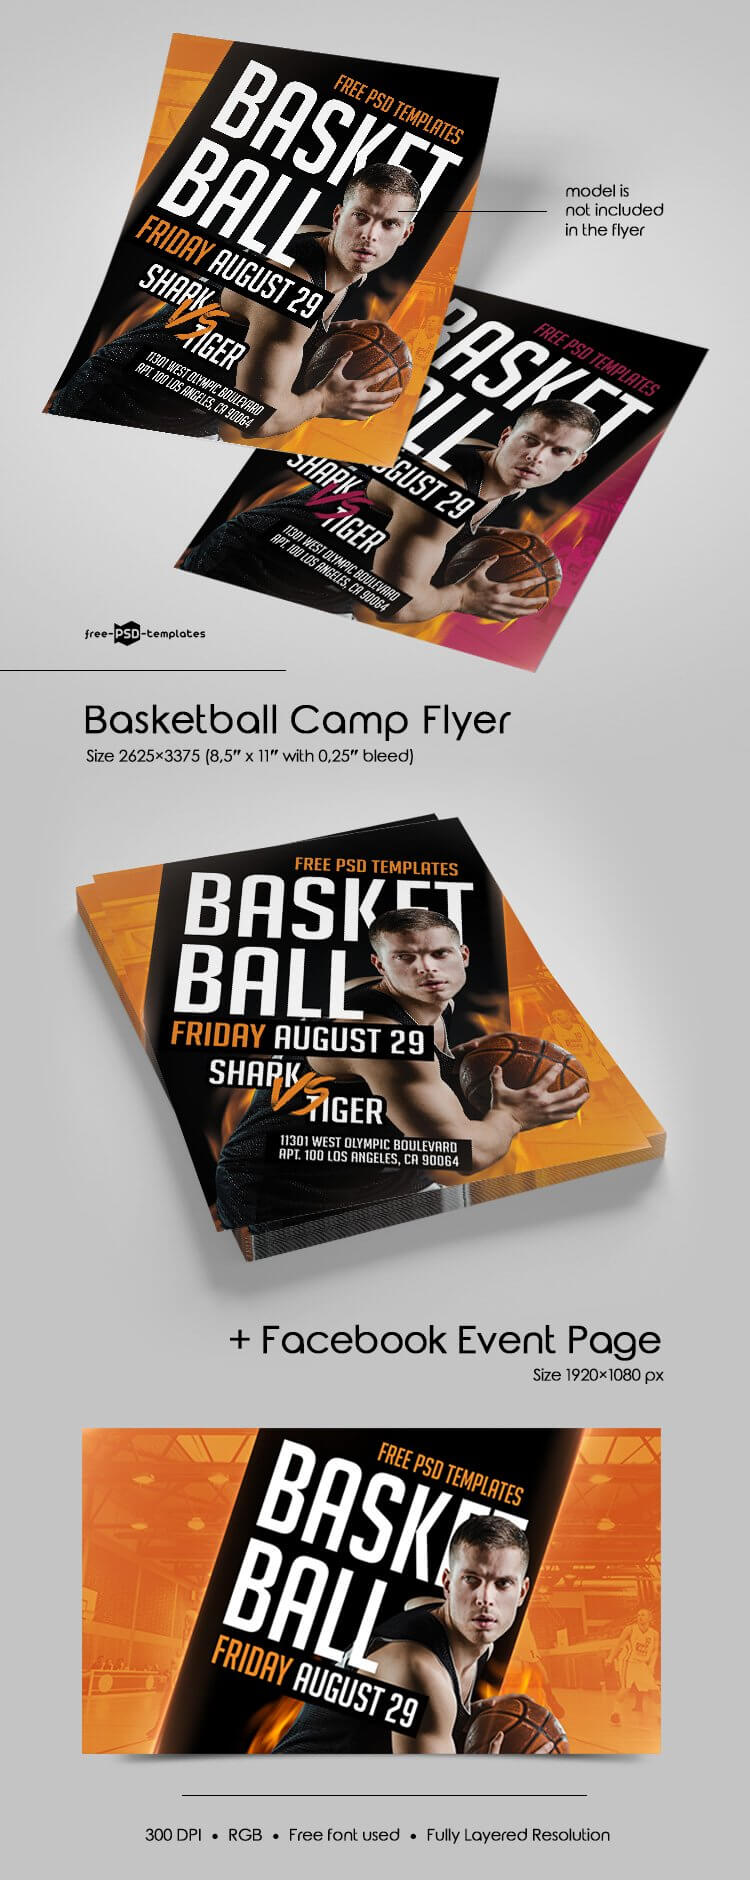 Free Basketball Camp Flyer In Psd | Free Psd Templates Inside Basketball Camp Brochure Template